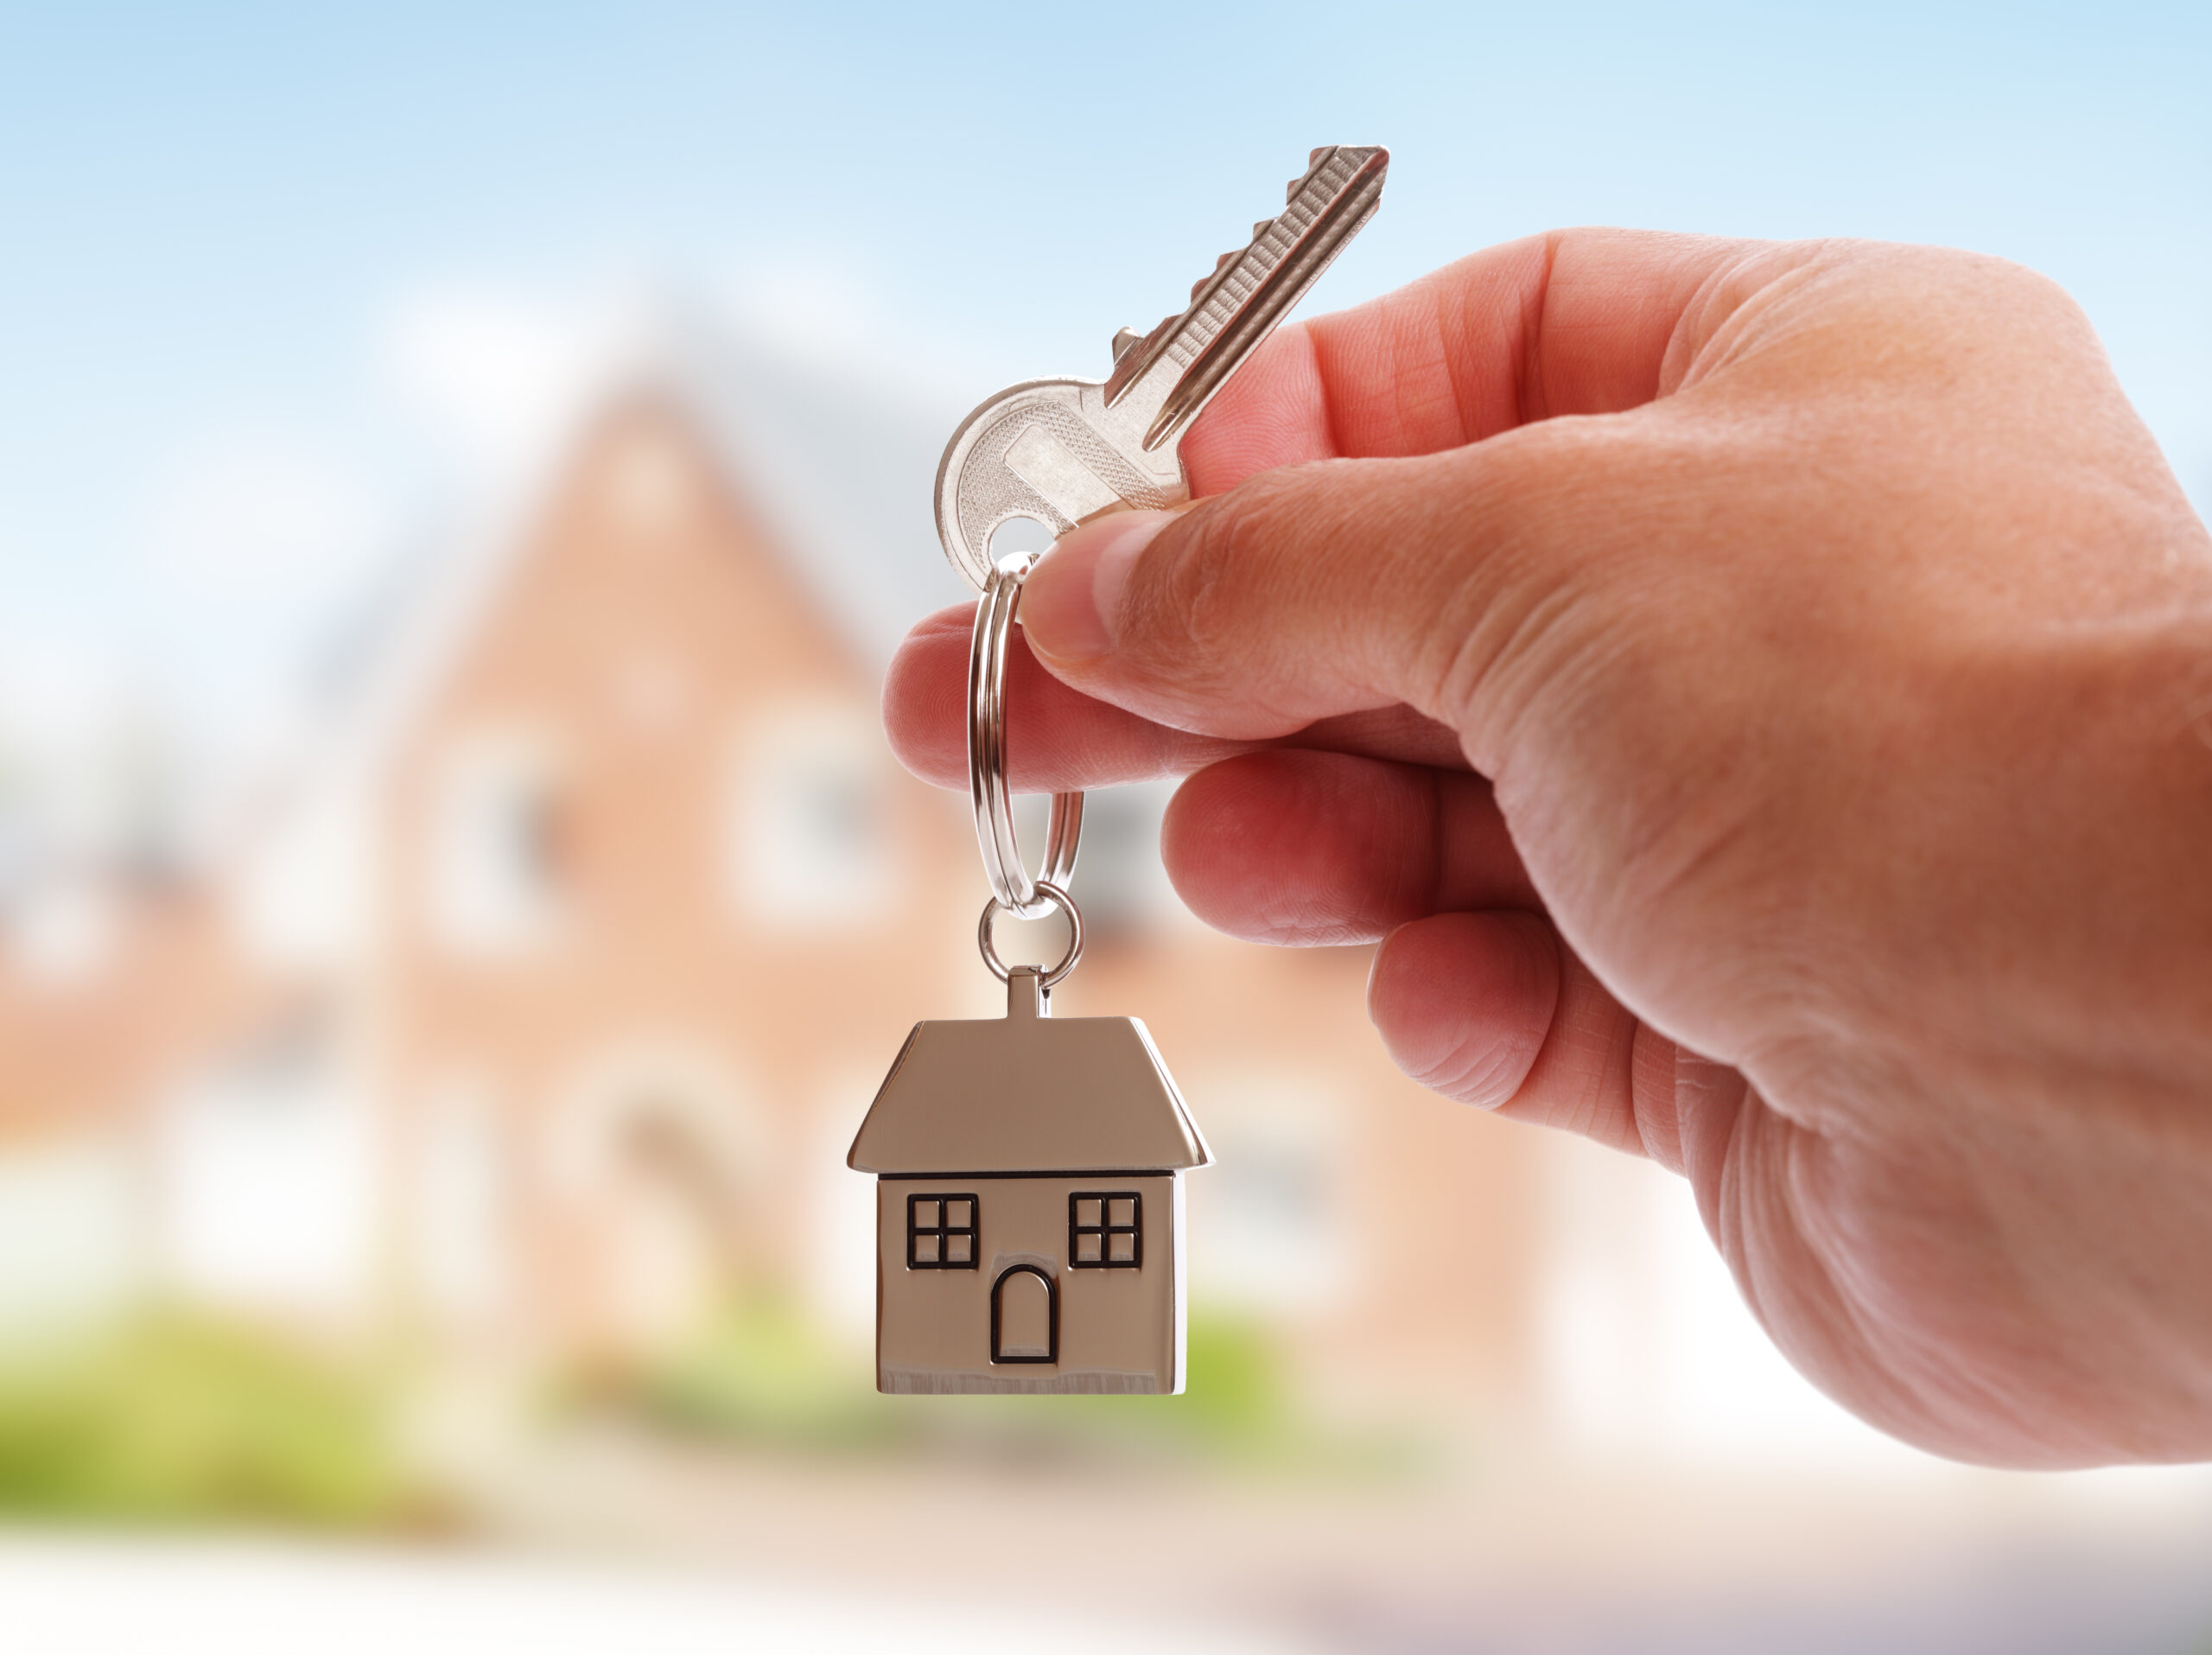 What do people look for in a new home? - Holding house keys on house shaped keychain in front of a new home